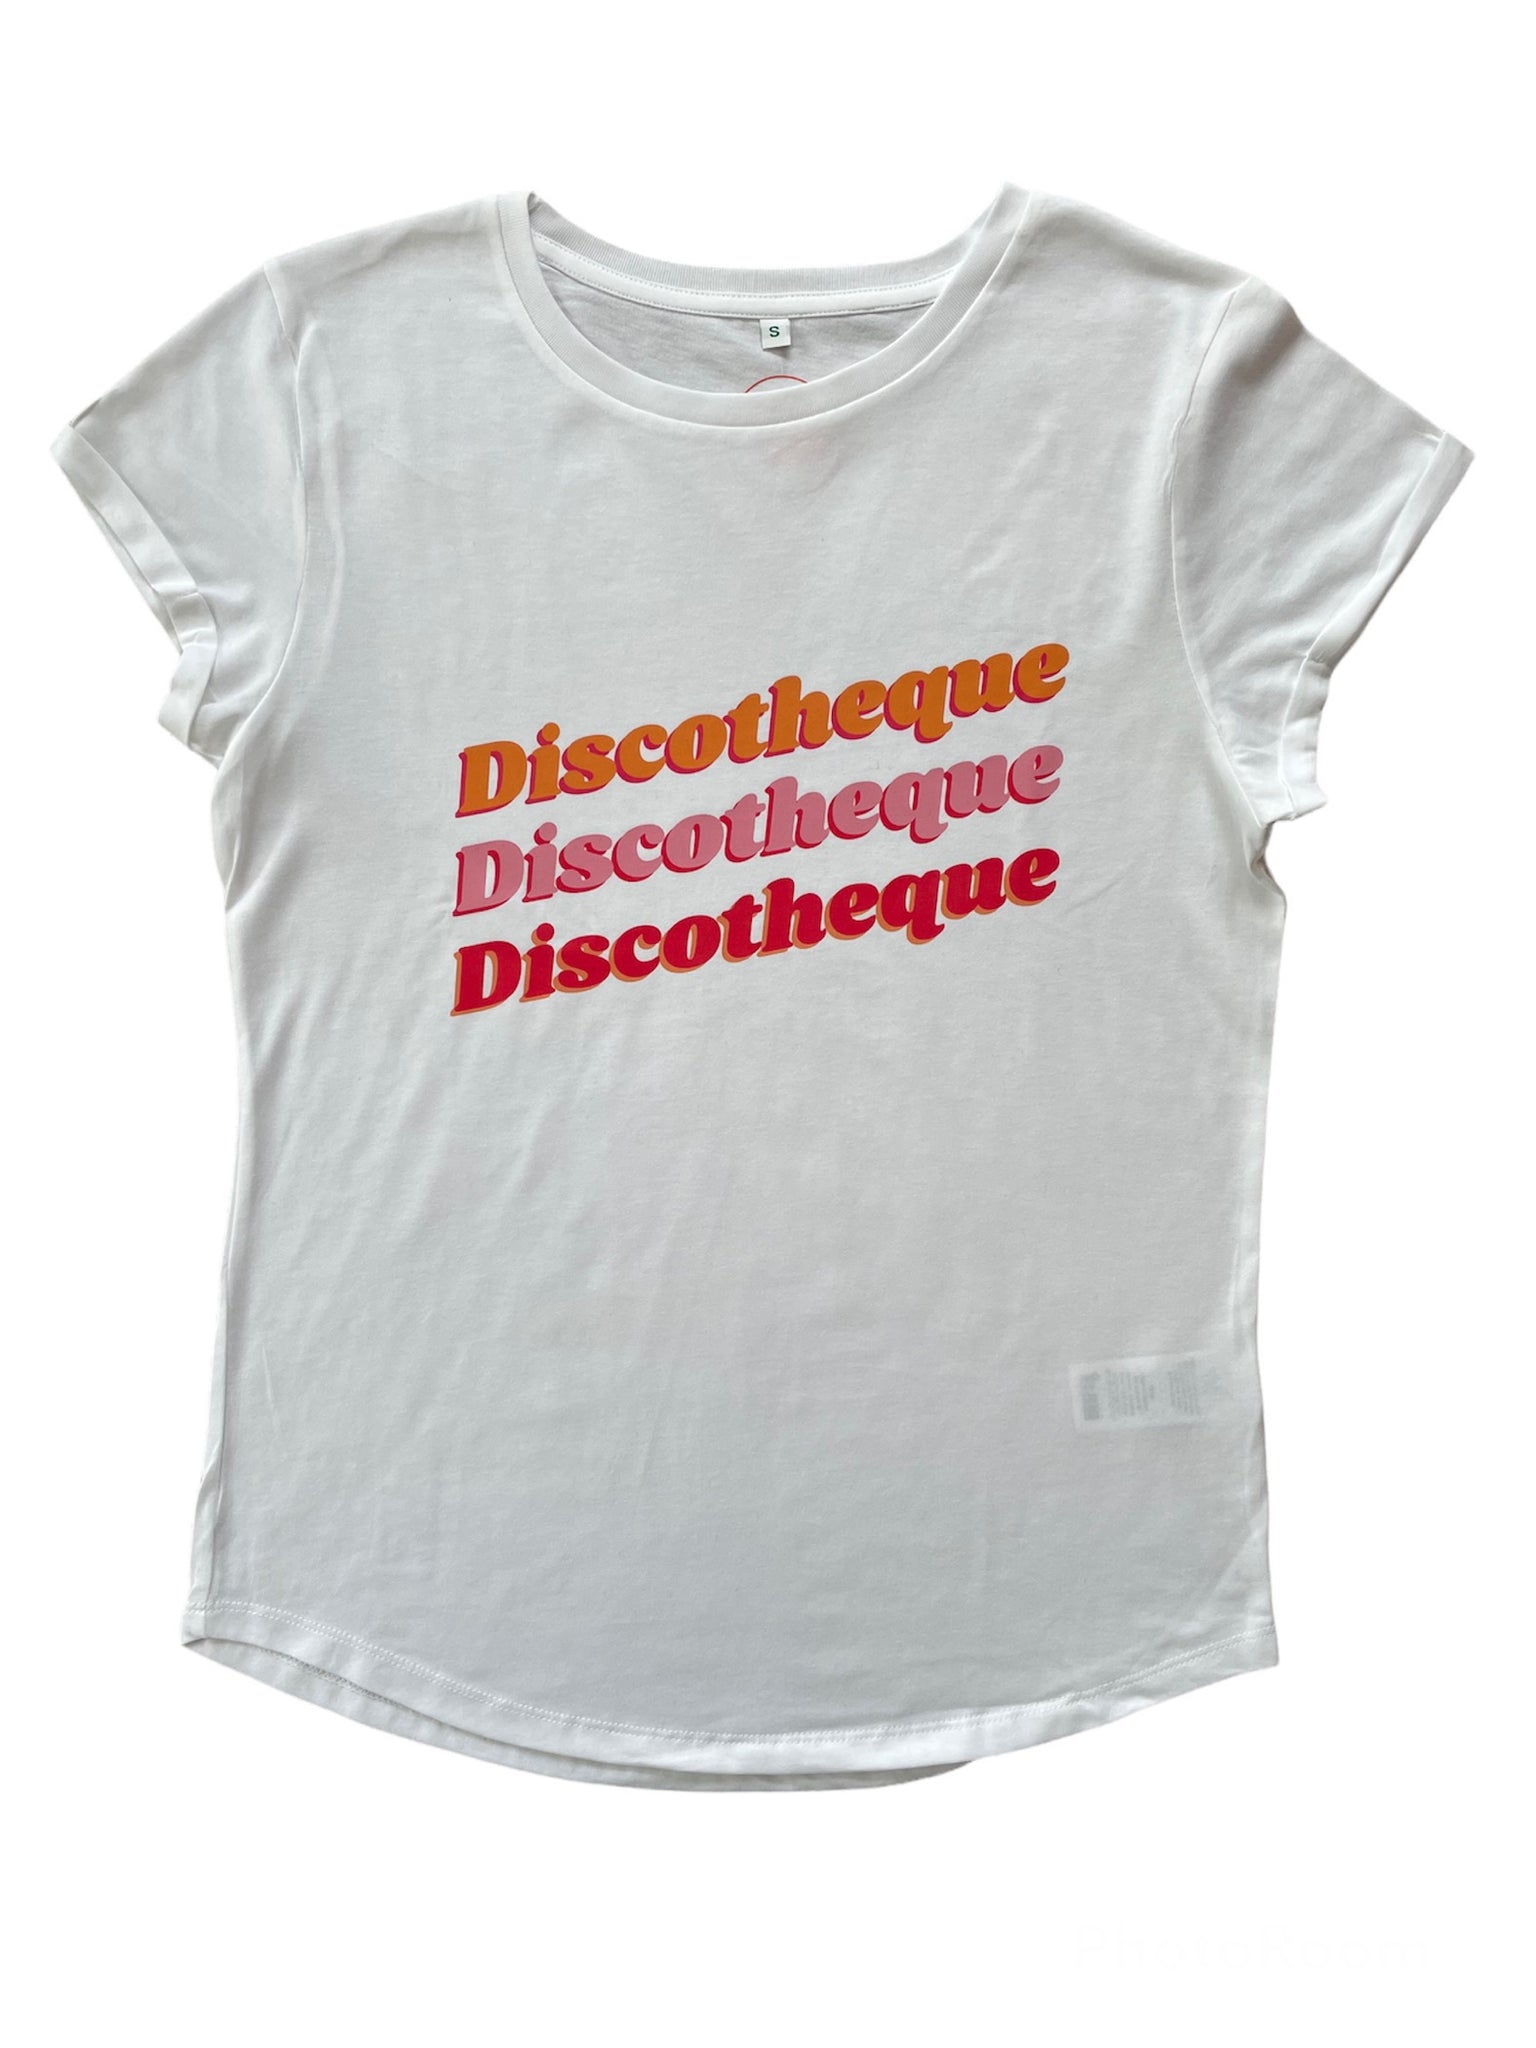 The Discotheque Ladies T-Shirt